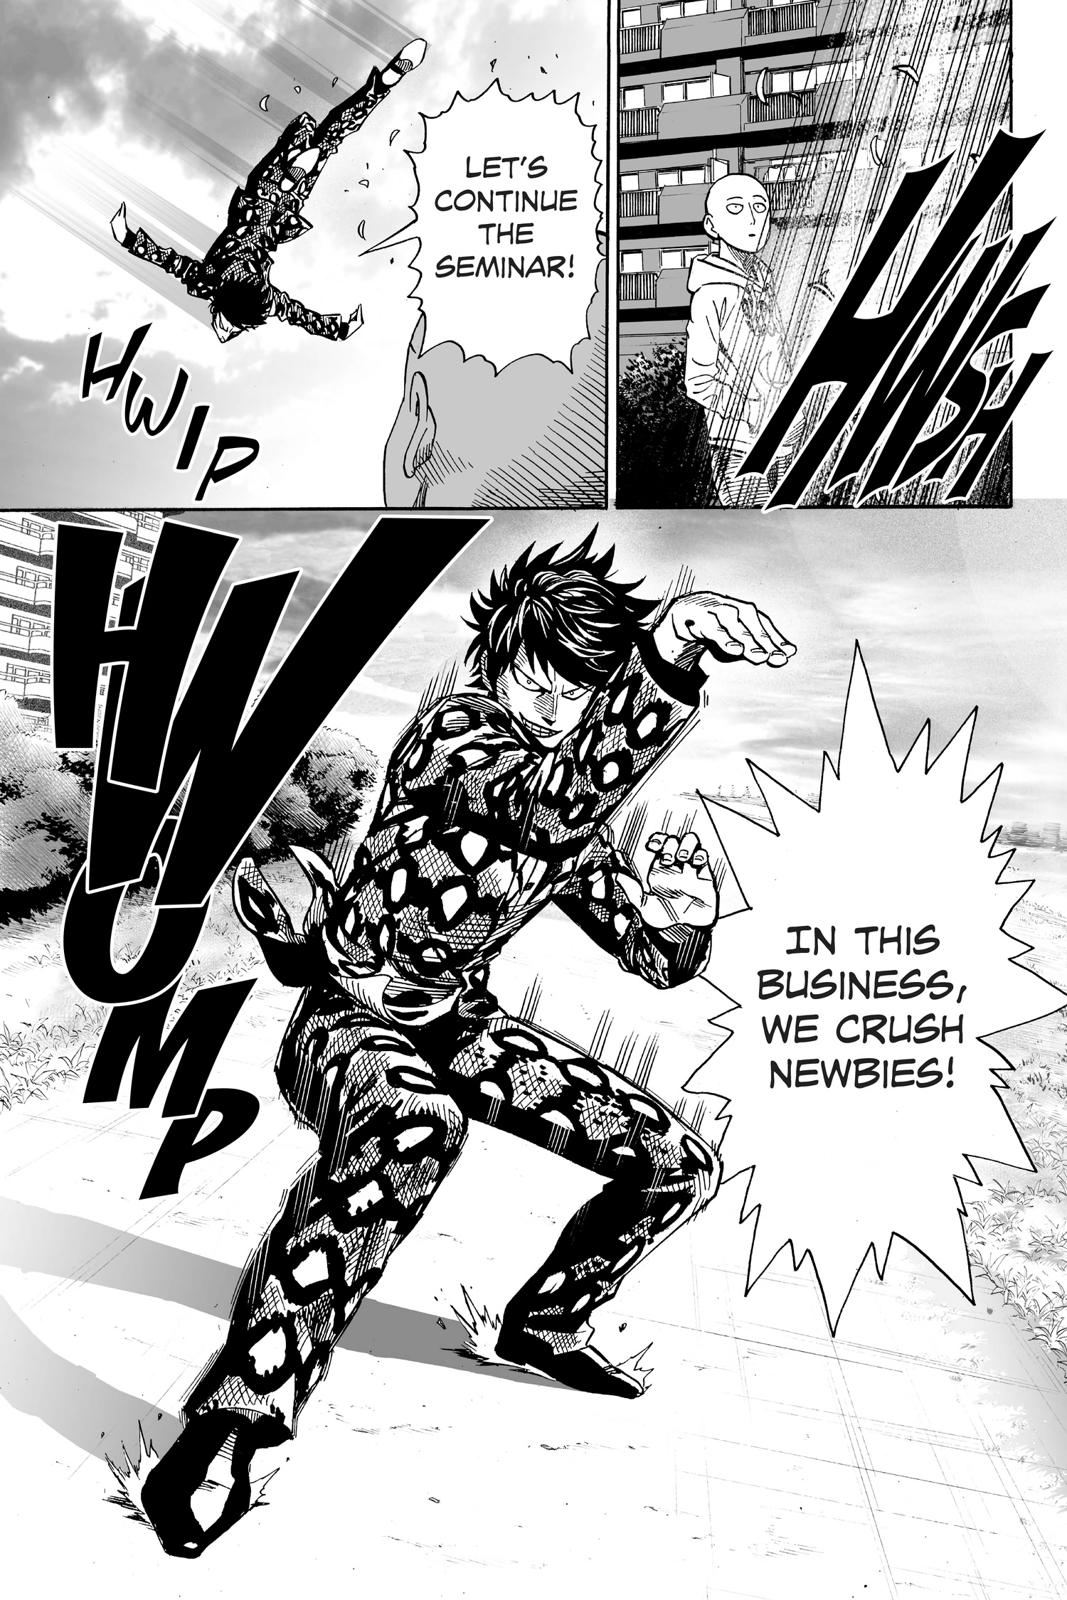 One-Punch Man, Punch 16 image 27